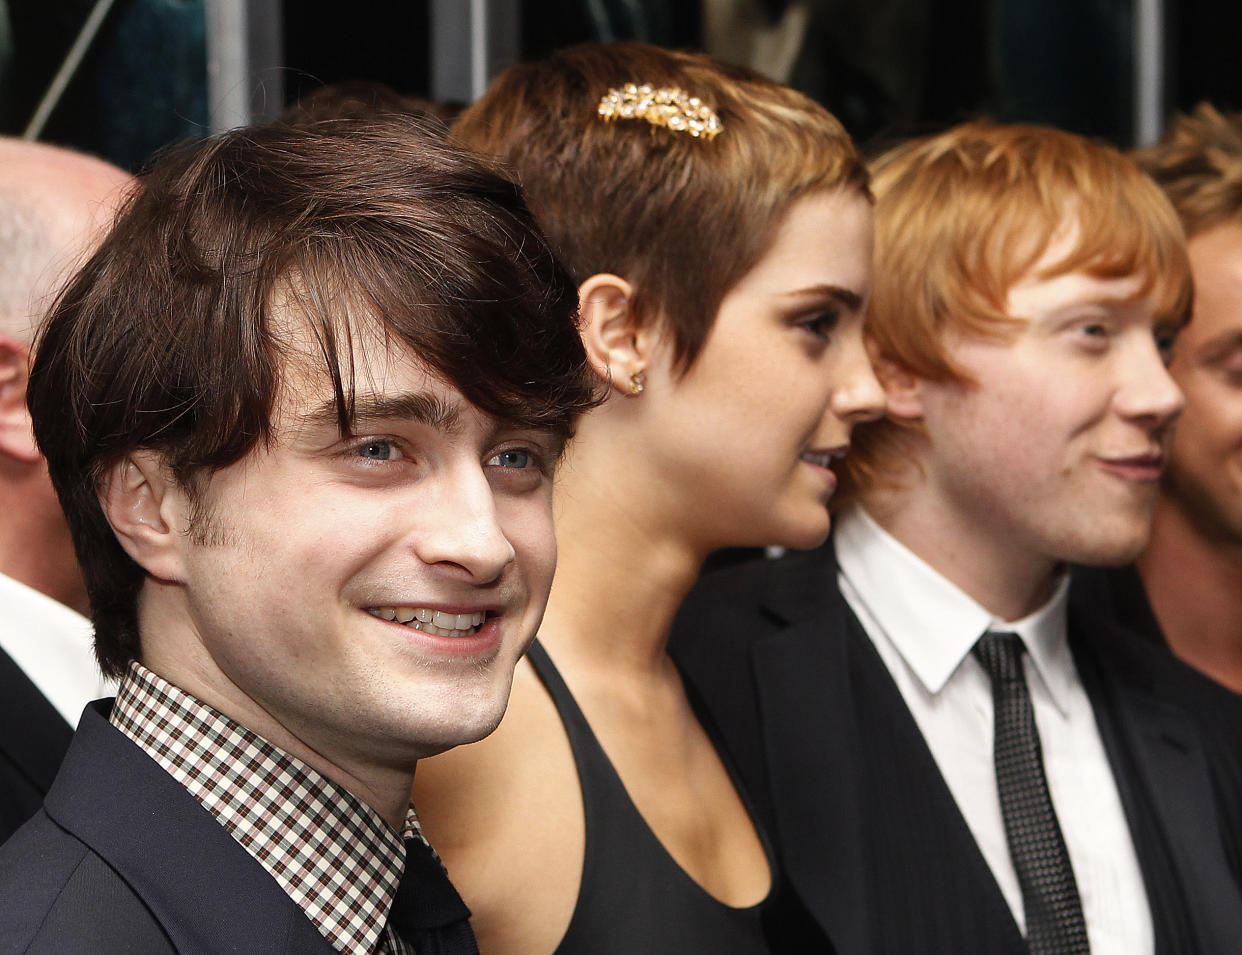 Cast members Daniel Radcliffe (L), Emma Watson and Rupert Grint (R) pose at the premiere of 